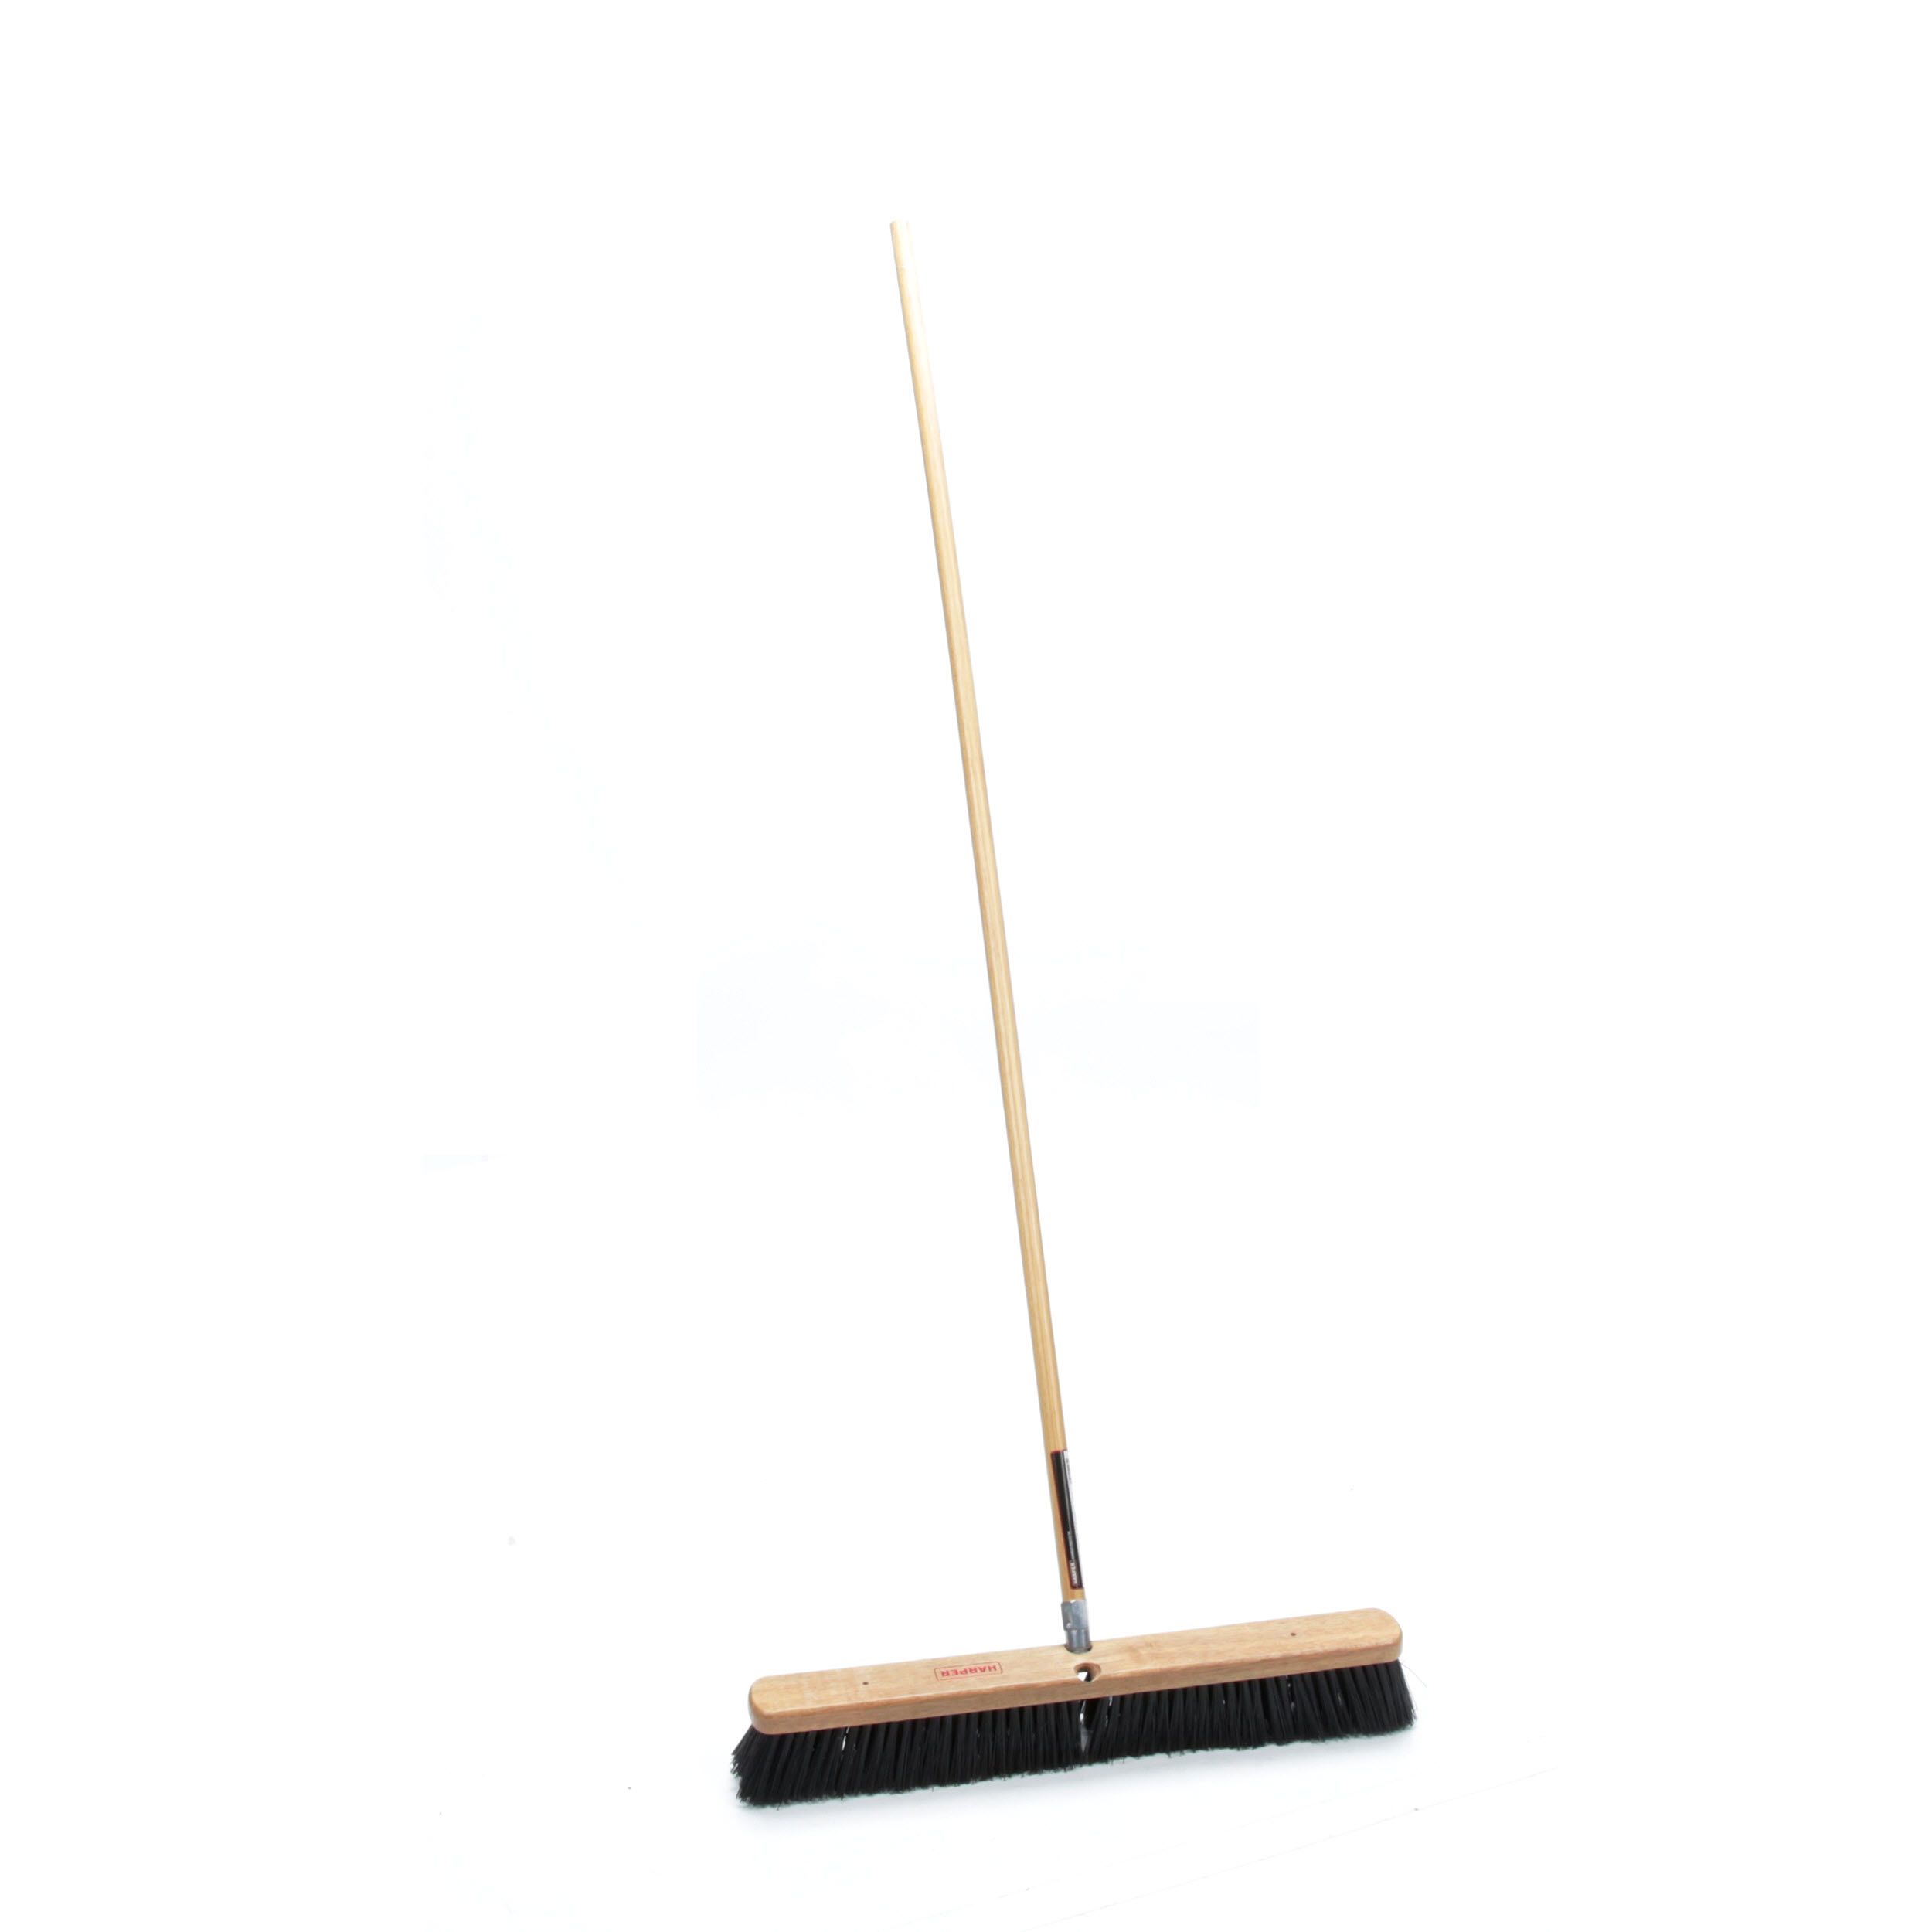 Push Broom 2 Pack 24in Super Stiff Poly Fibers Wood Handle Rough Surface Quickie 